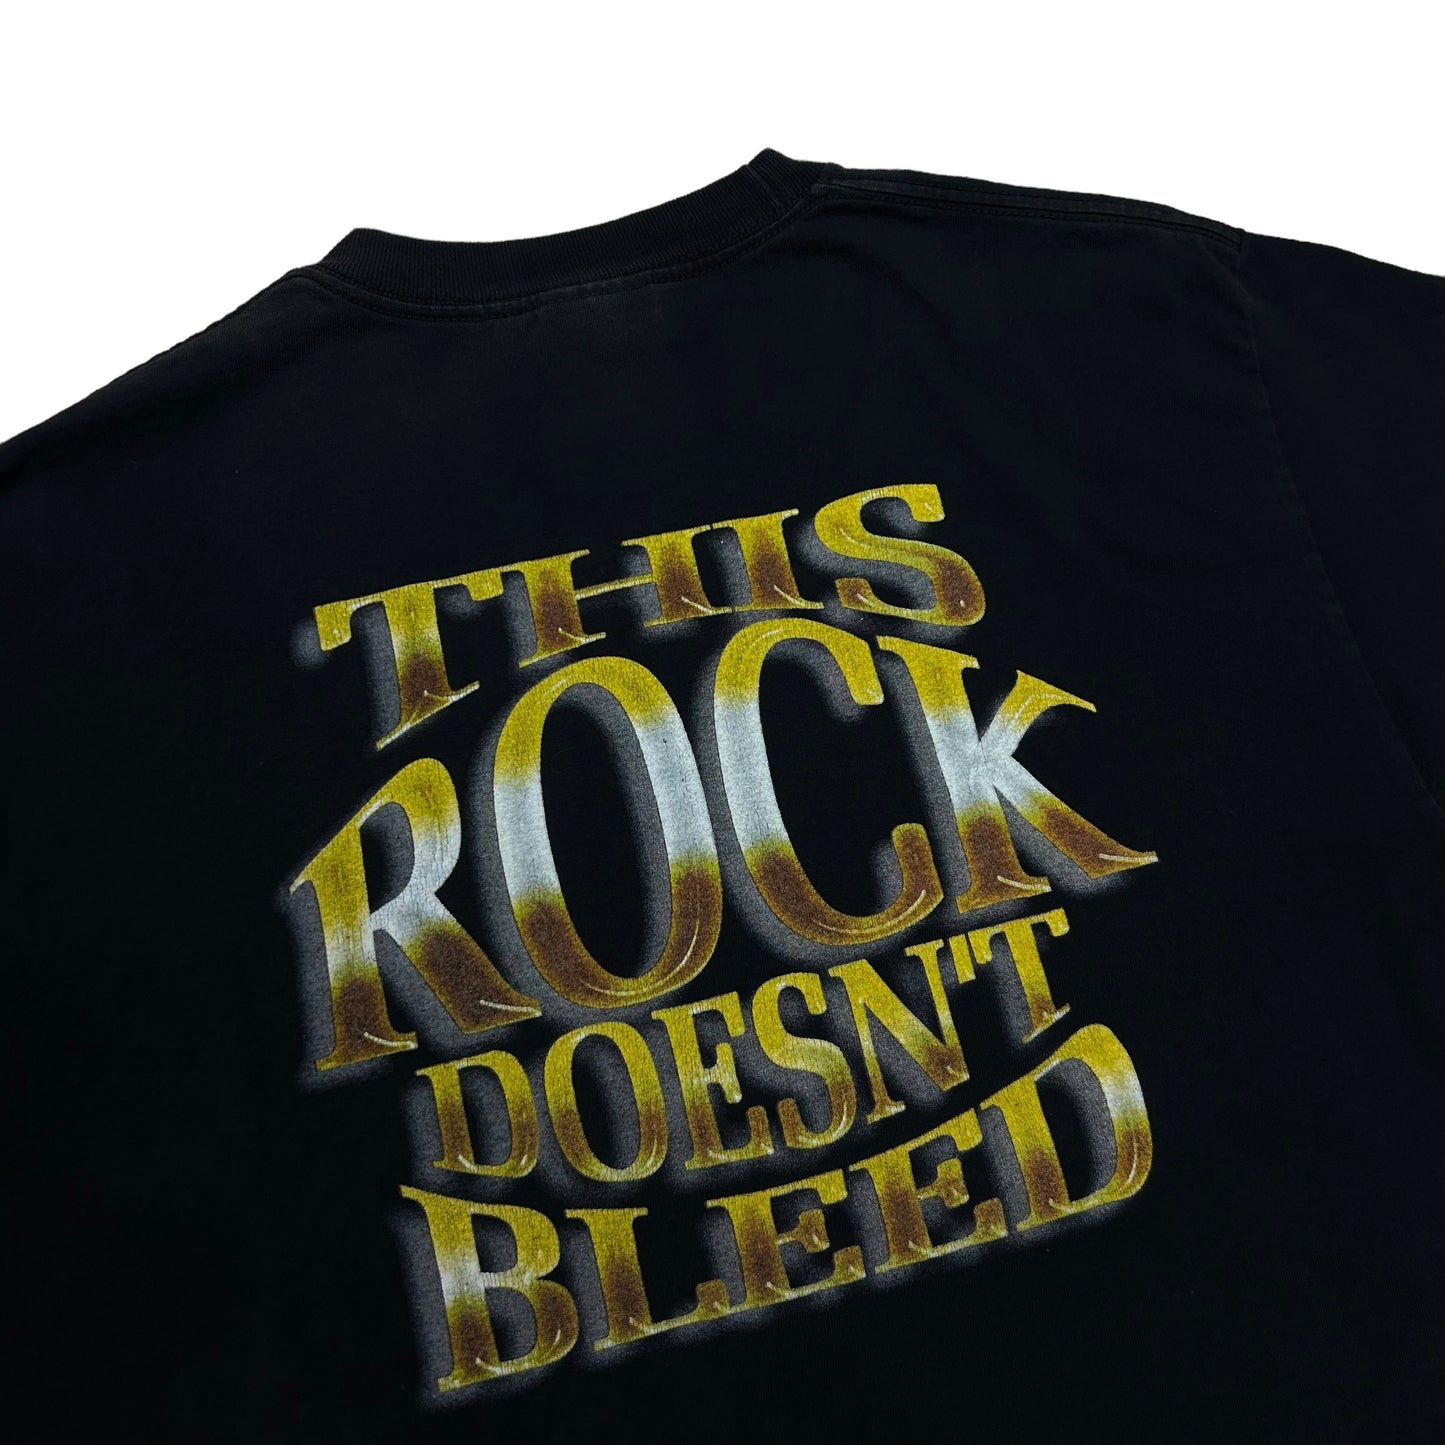 Vintage 1990s WWF The Rock “This Rock Doesn’t Bleed” Black Graphic T-Shirt - Size Large